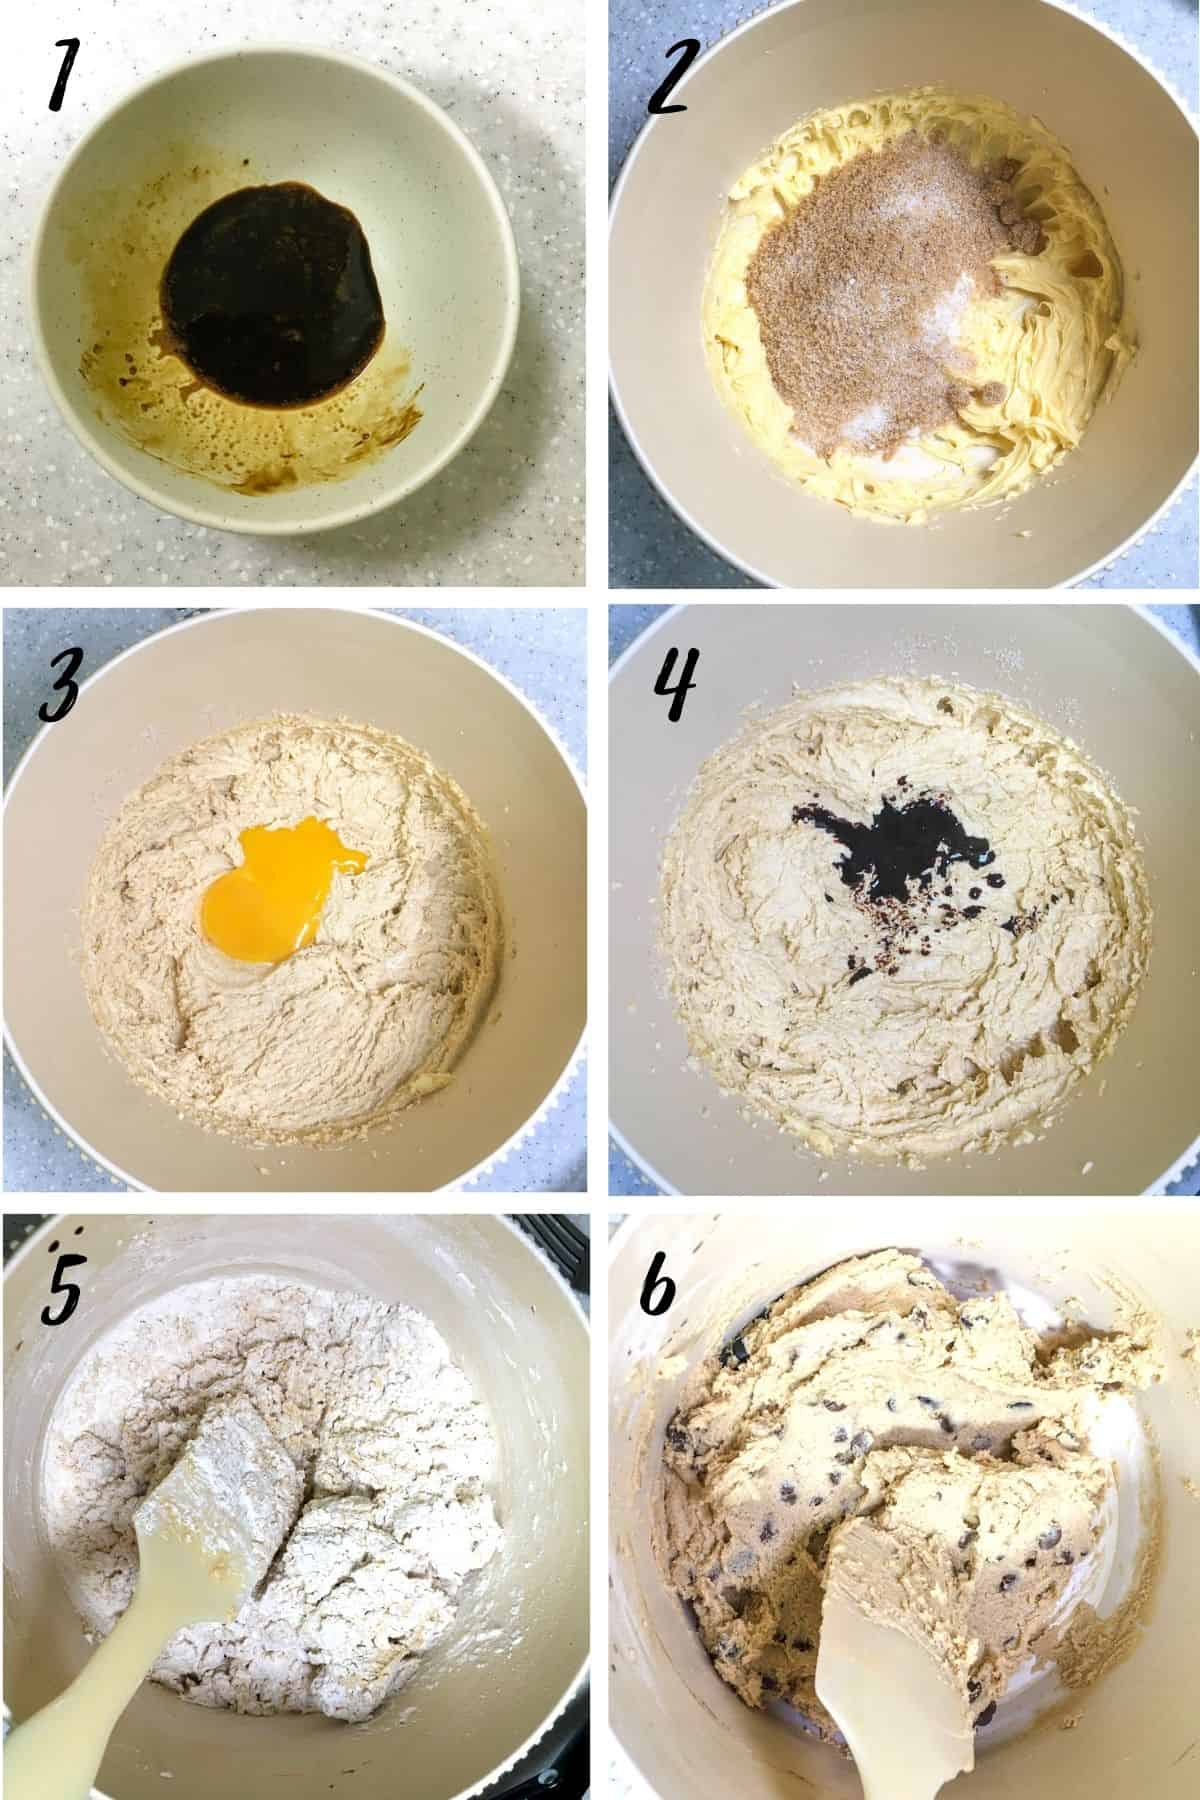 A poster of 6 images show how to mix coffee flavored chocolate chip cookie dough